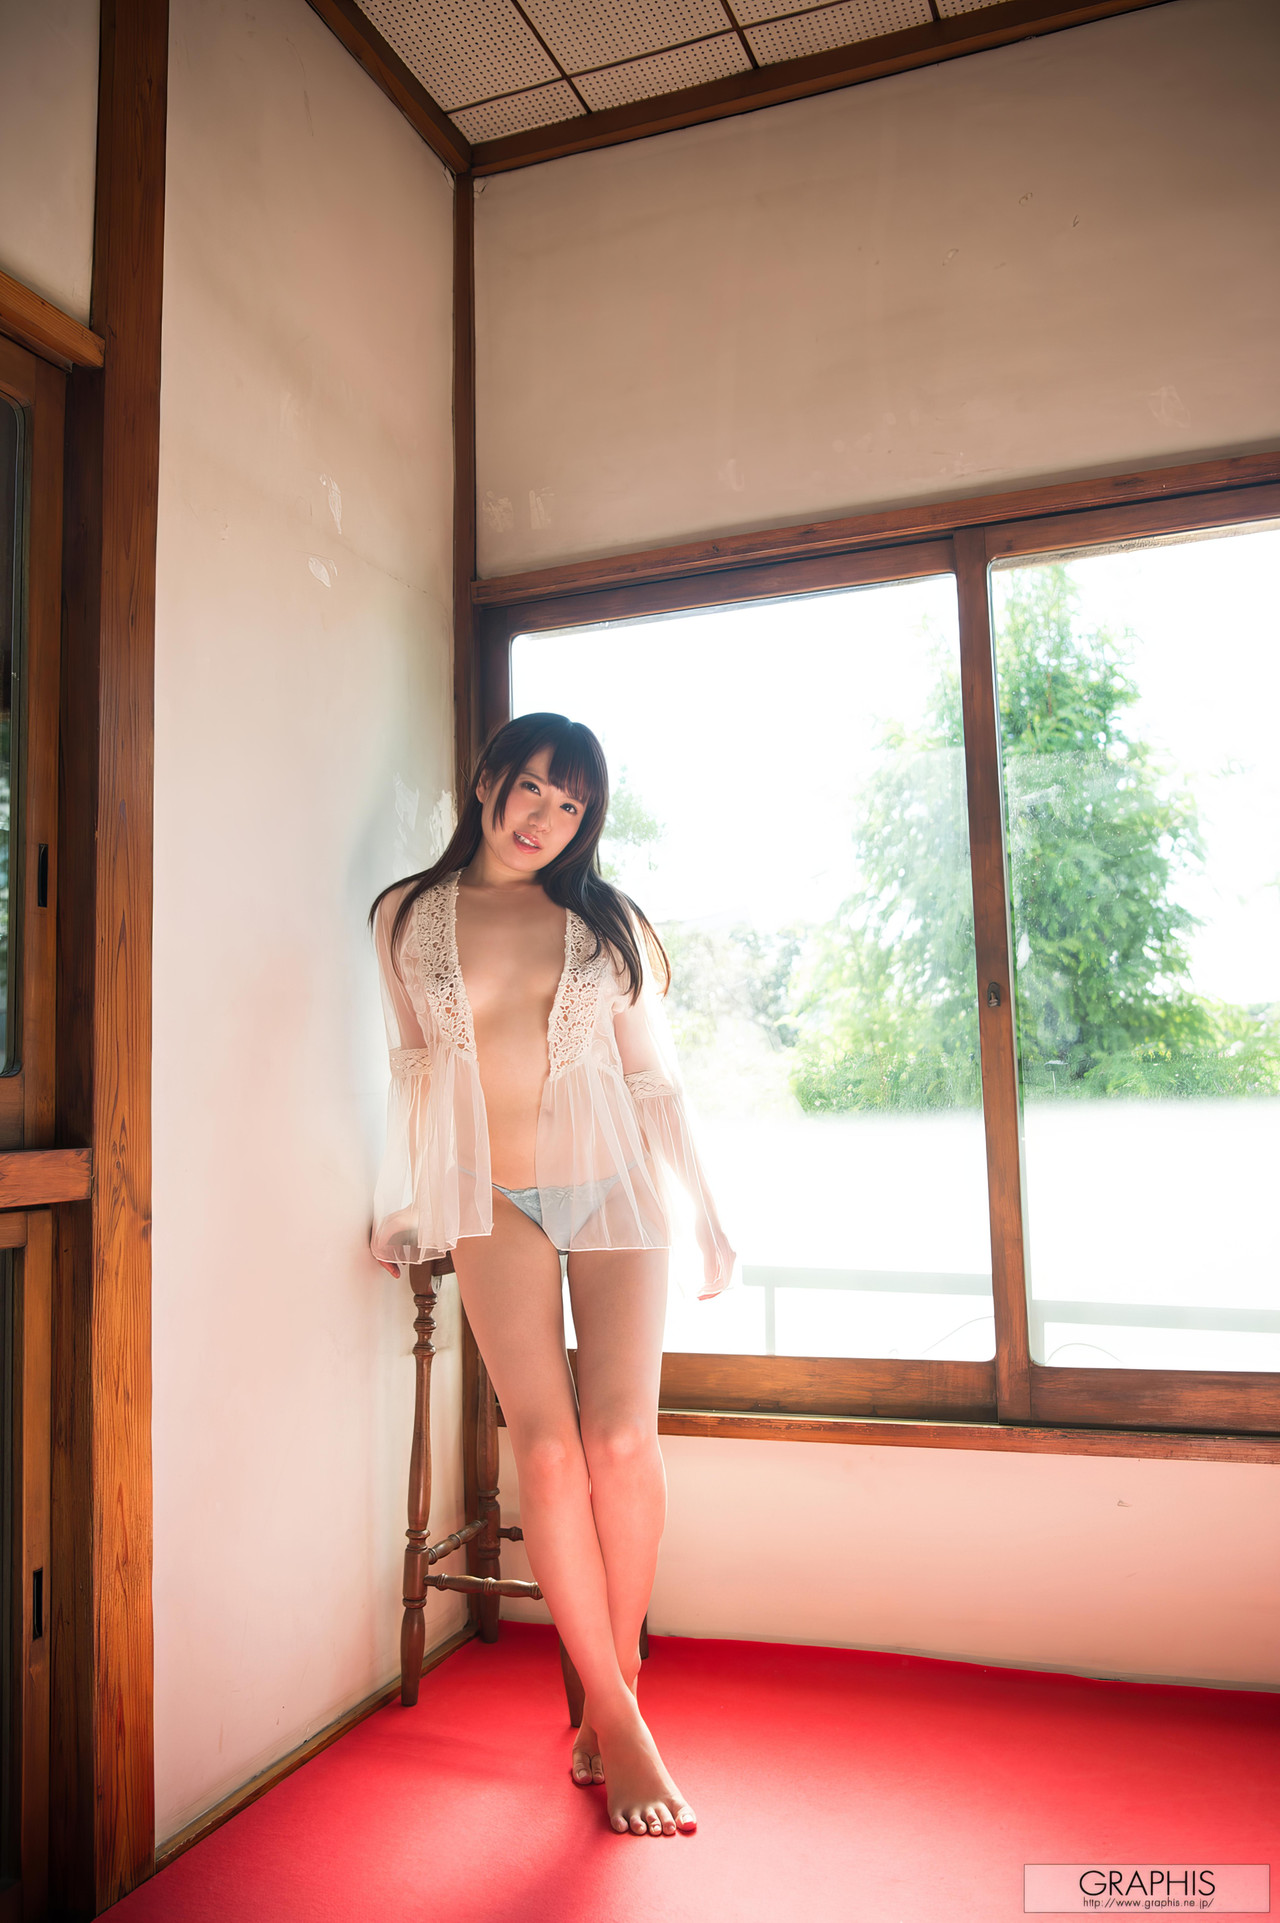 Rin Hatsumi 初美りん, [Graphis] Gals 『Look at me!』 Vol.03